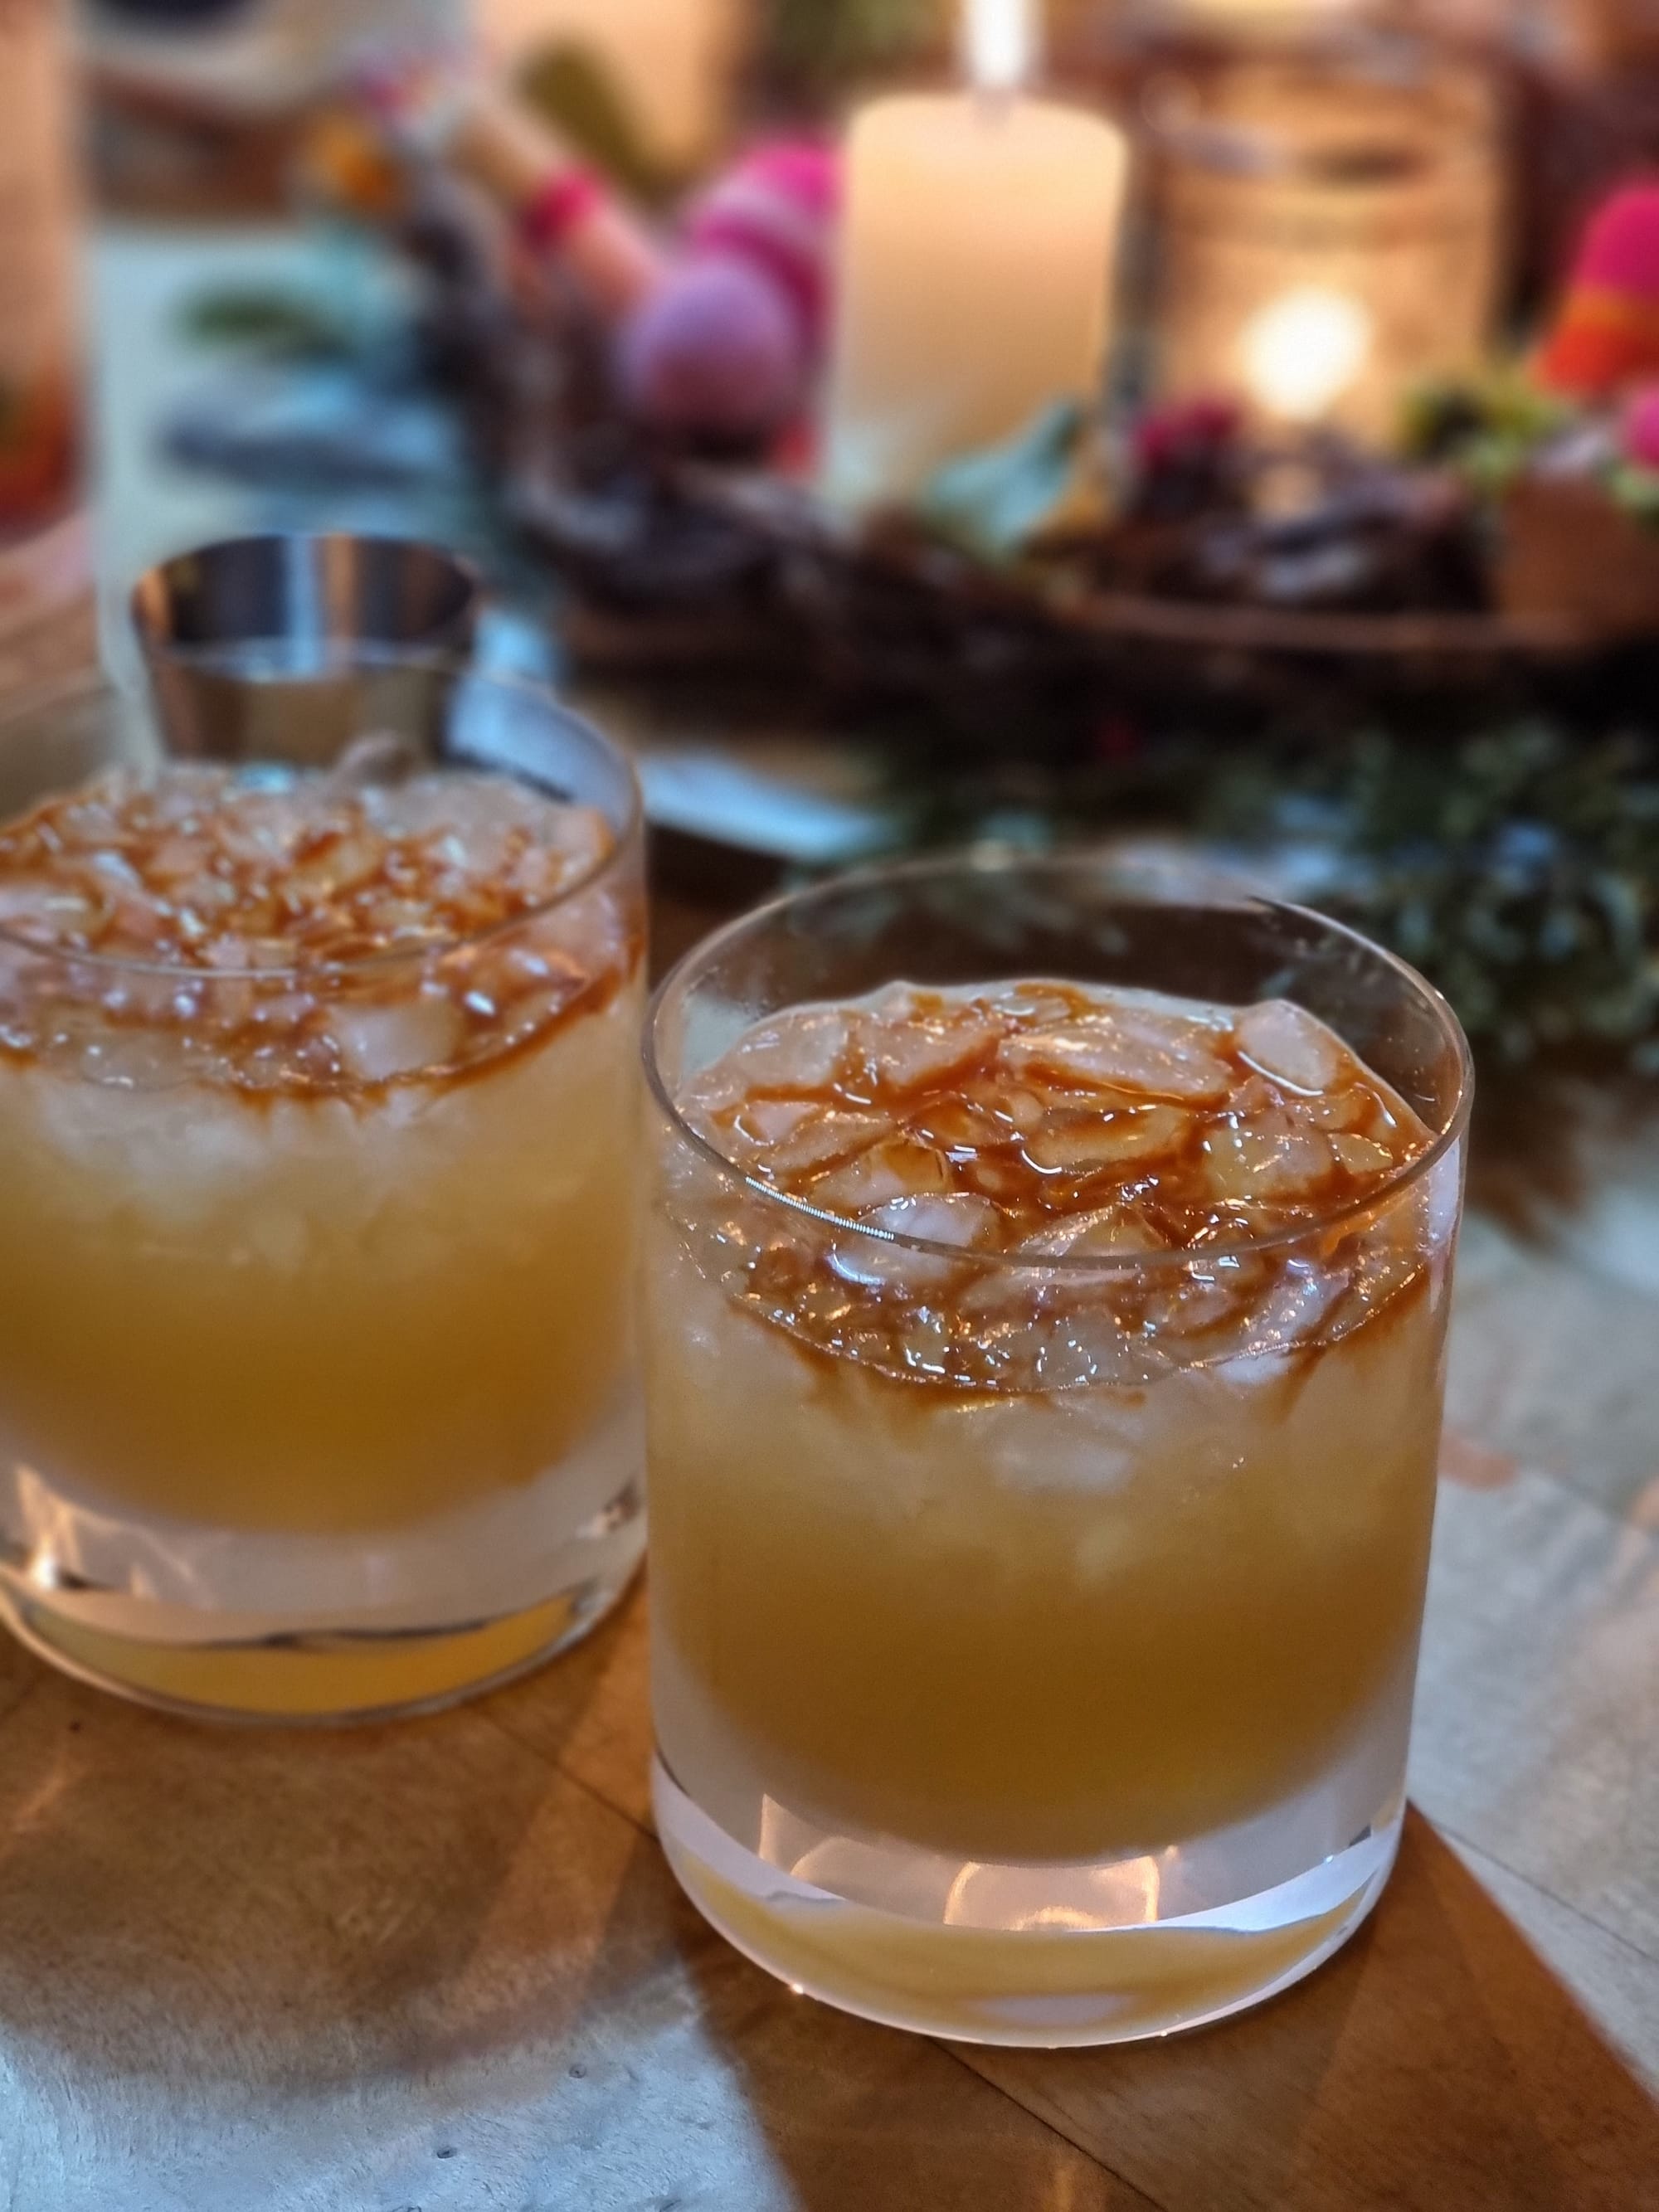 Two double old fashioned glasses filled with a yellowish liquid and crushed ice. On top the magical pattern of five dashes of reddish brown Angostura bitters spread out among the little pebbles of crushed ice. In the background, blurry, a wreath with burning candles.